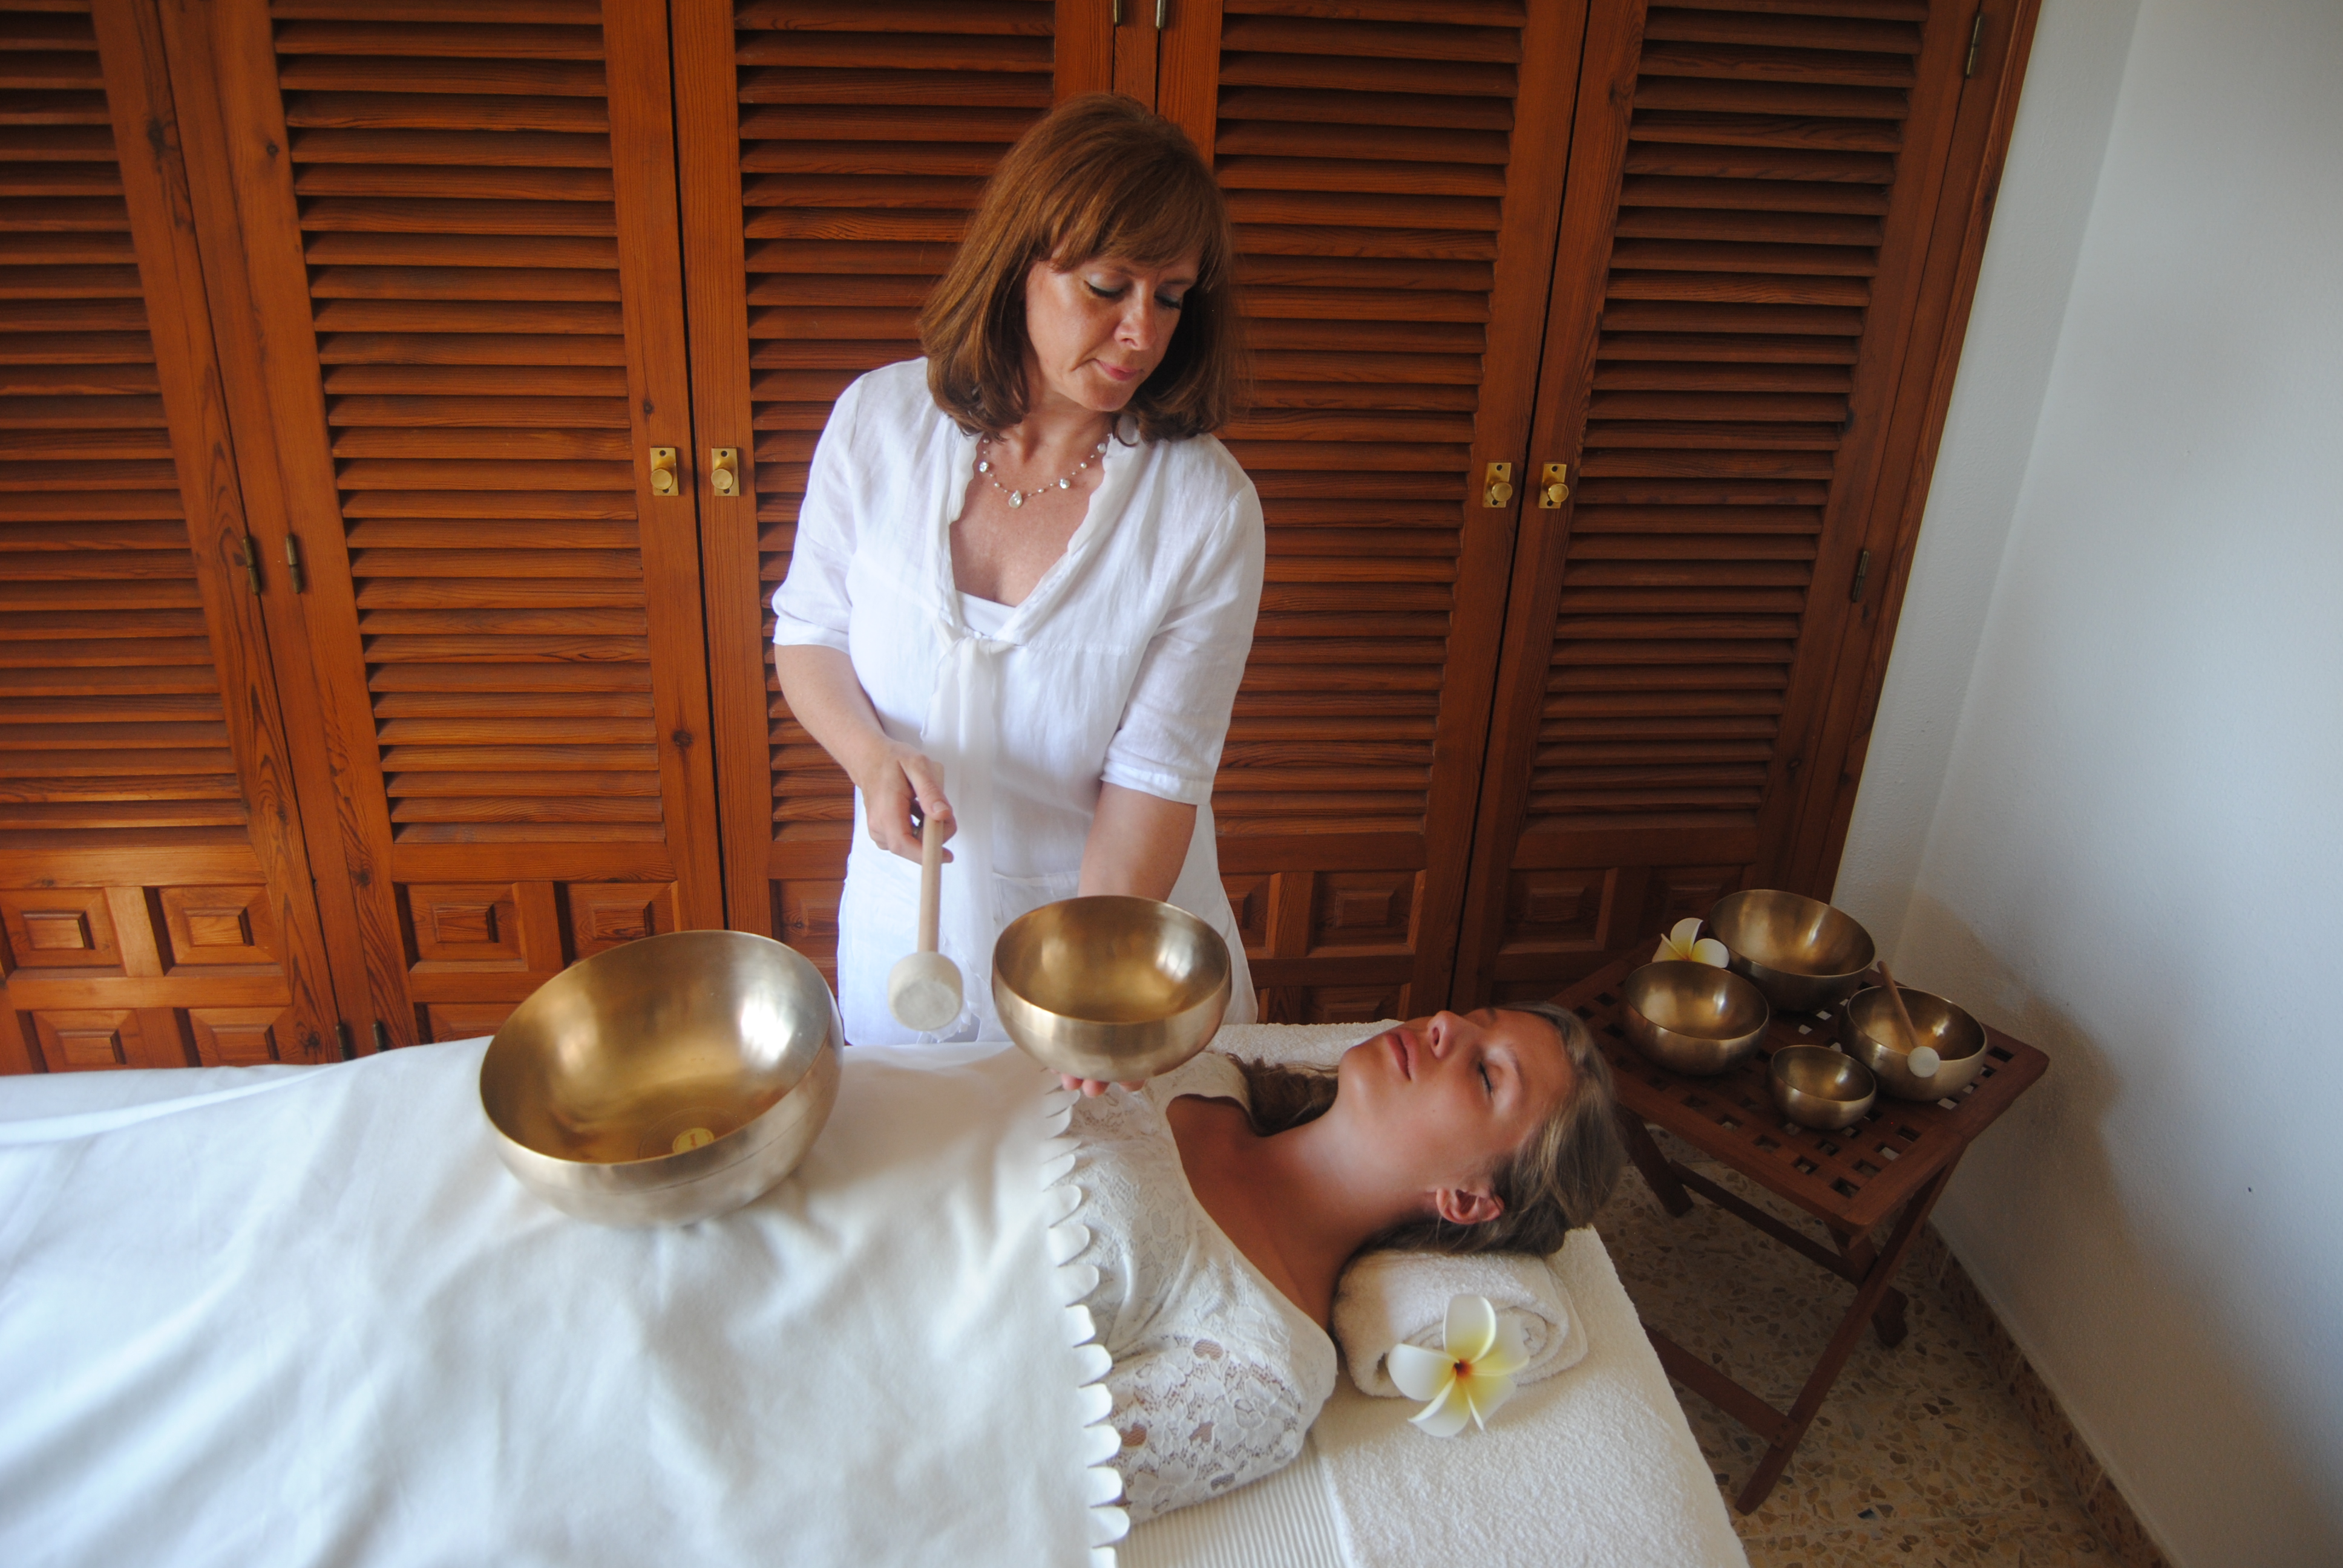 MALAGA - NEW DATES ADDED: Peter Hess Sound Massage Intensive Course in Southern 